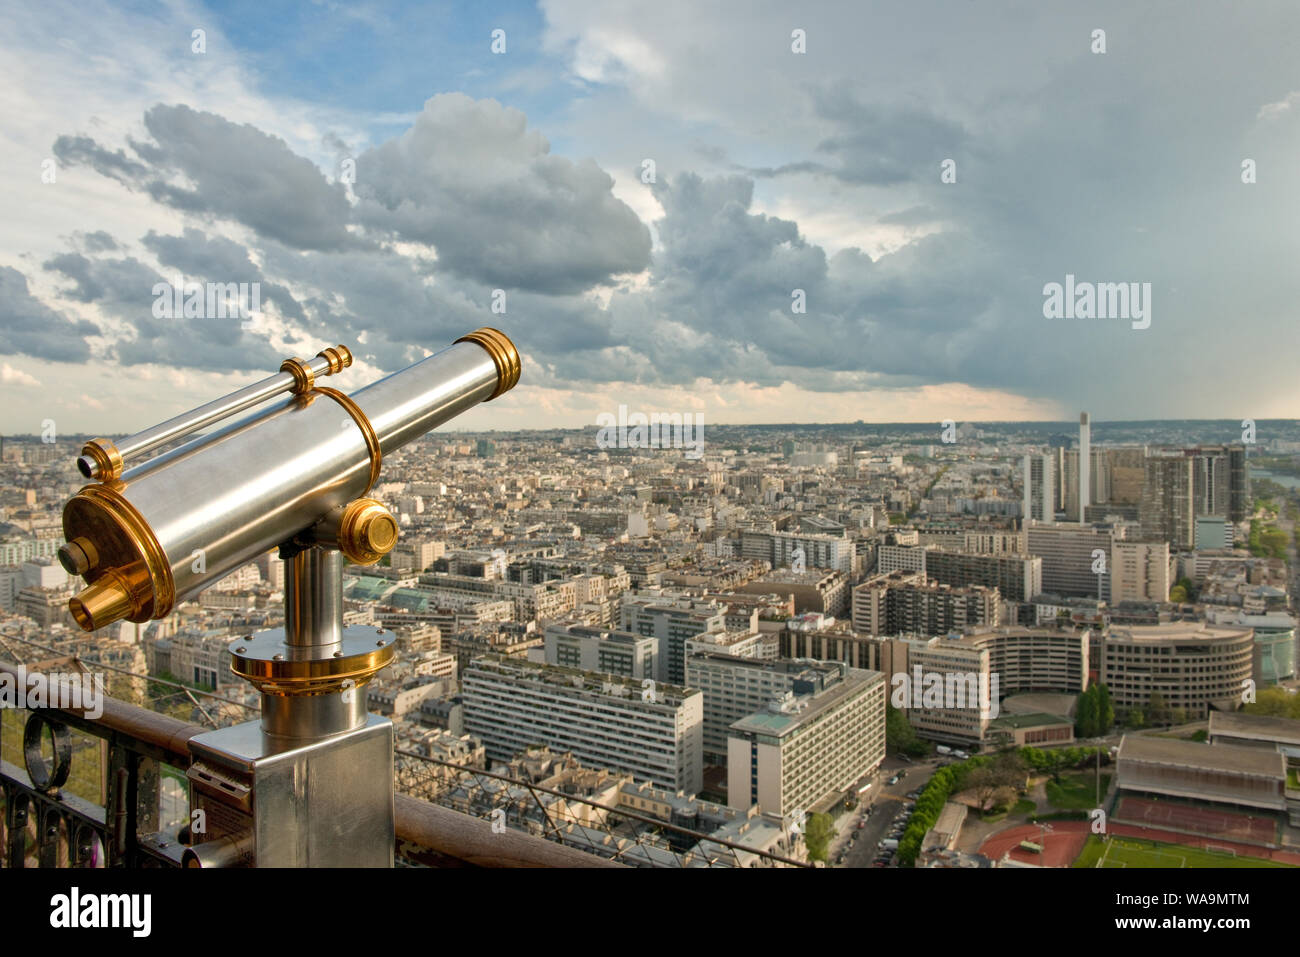 Coin-operated telescope on Eiffel Tower viewing platform. Looking south over city office buildings. With rain shower clouds. Paris, France Stock Photo